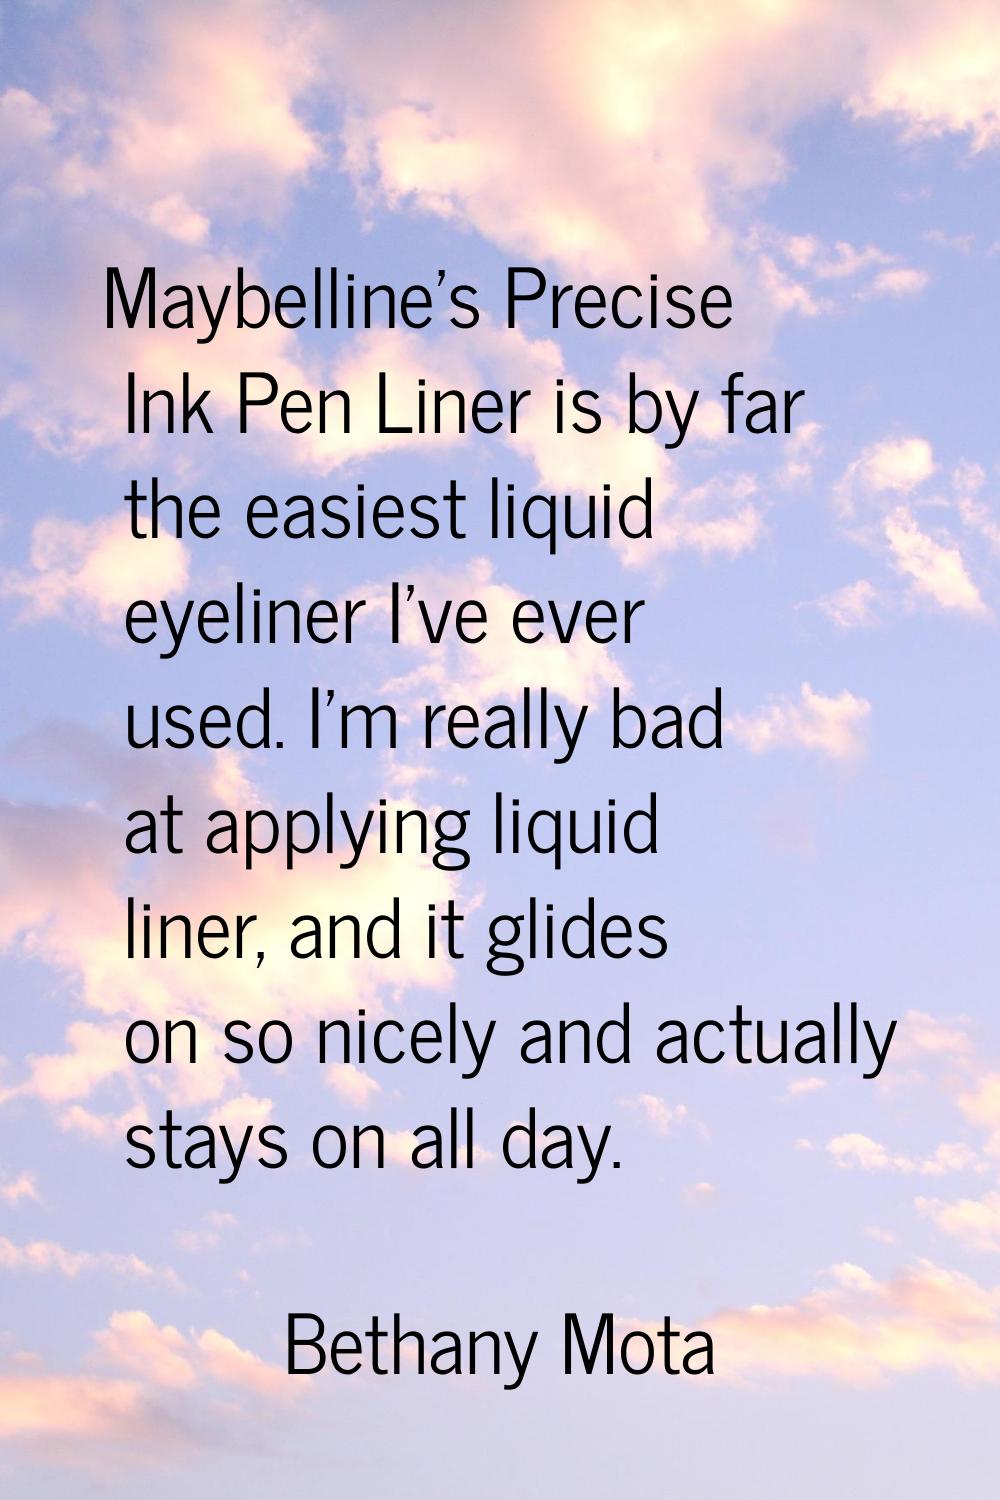 Maybelline's Precise Ink Pen Liner is by far the easiest liquid eyeliner I've ever used. I'm really